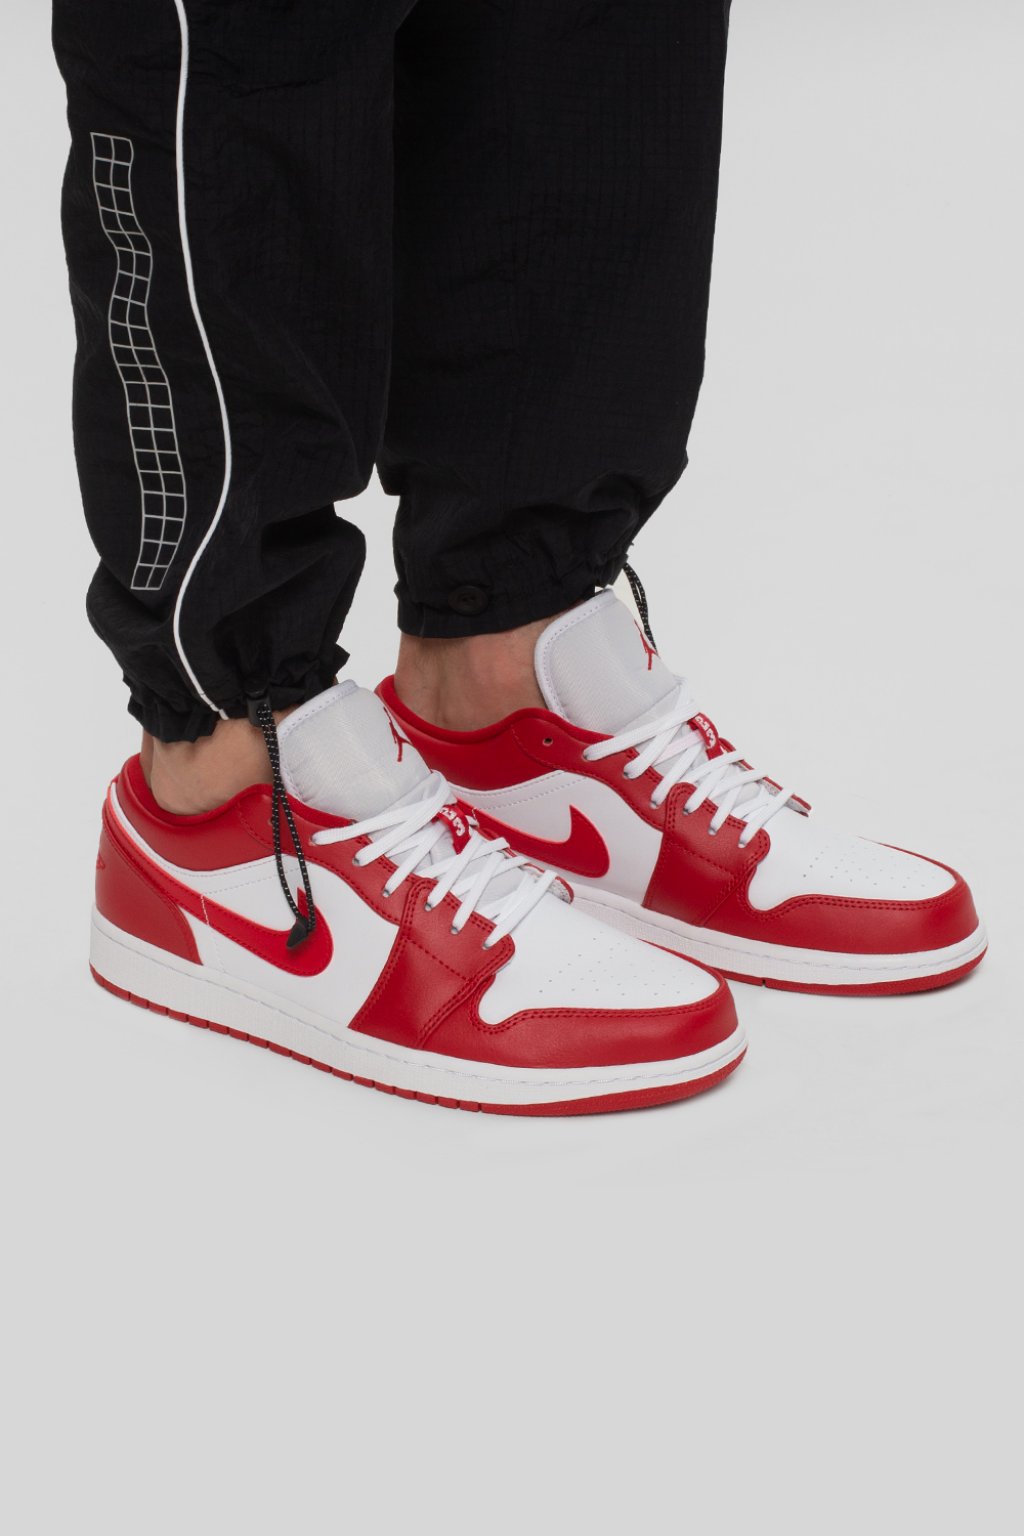 outfits with red and white jordans